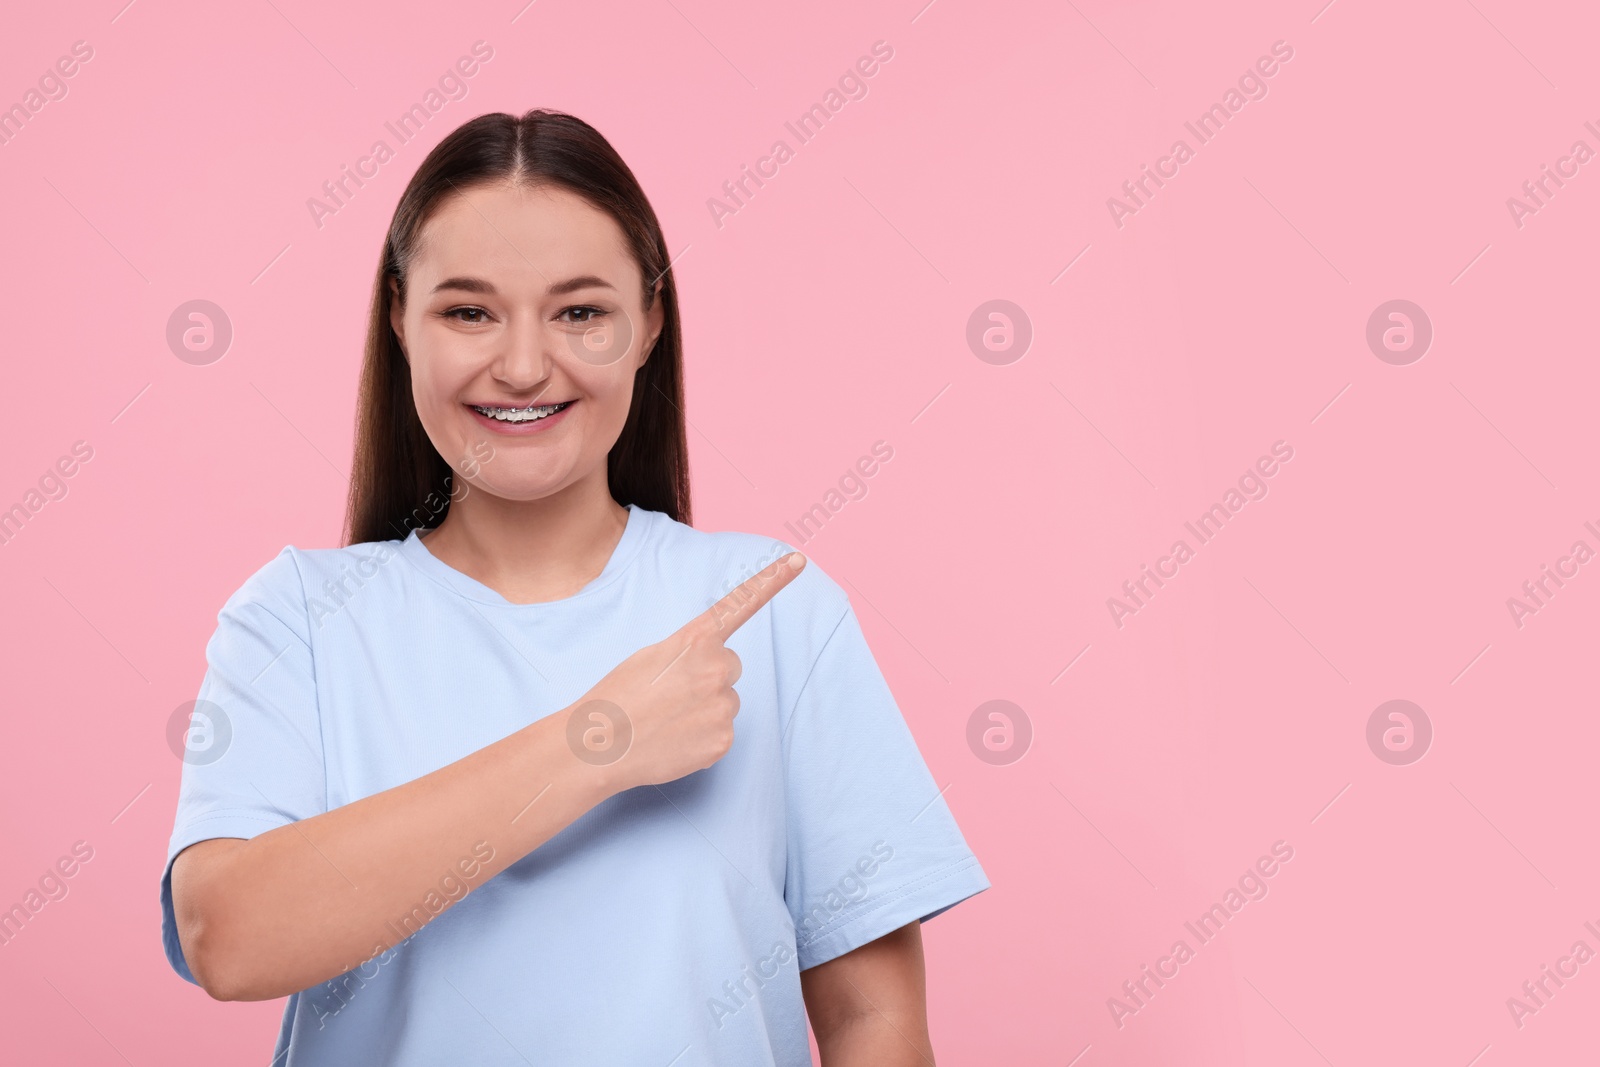 Photo of Smiling woman with dental braces pointing at something on pink background. Space for text